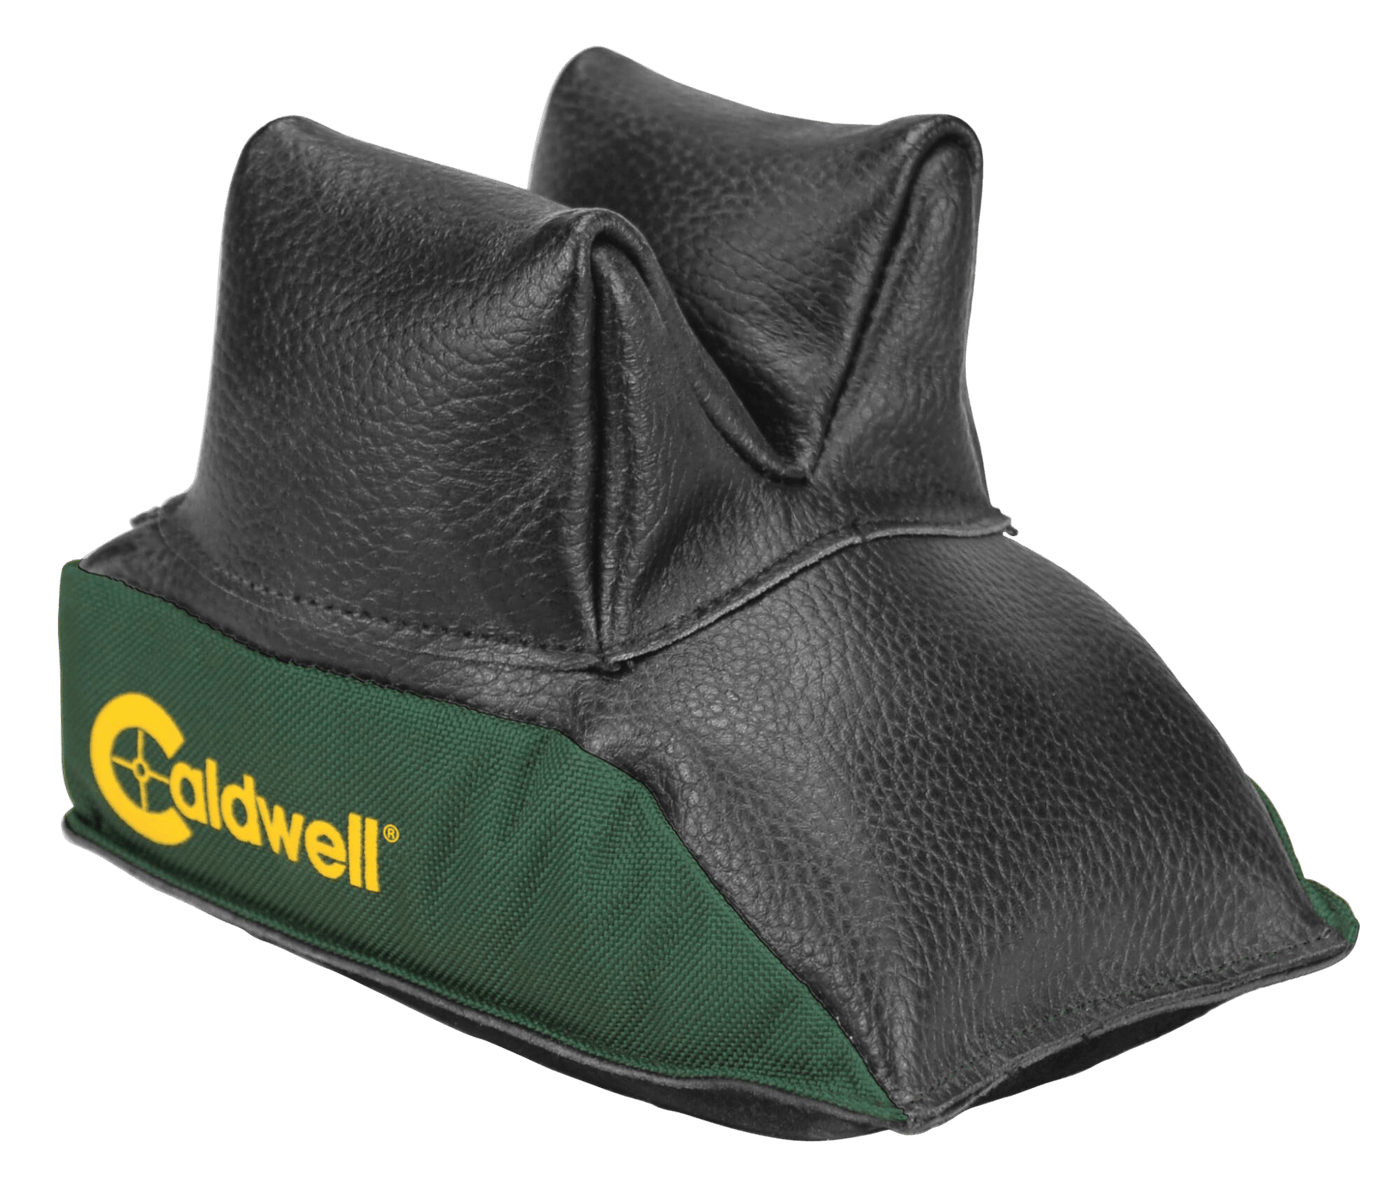 Caldwell Caldwell Universal Shooting Bag Unfilled Shooting Gear and Acc